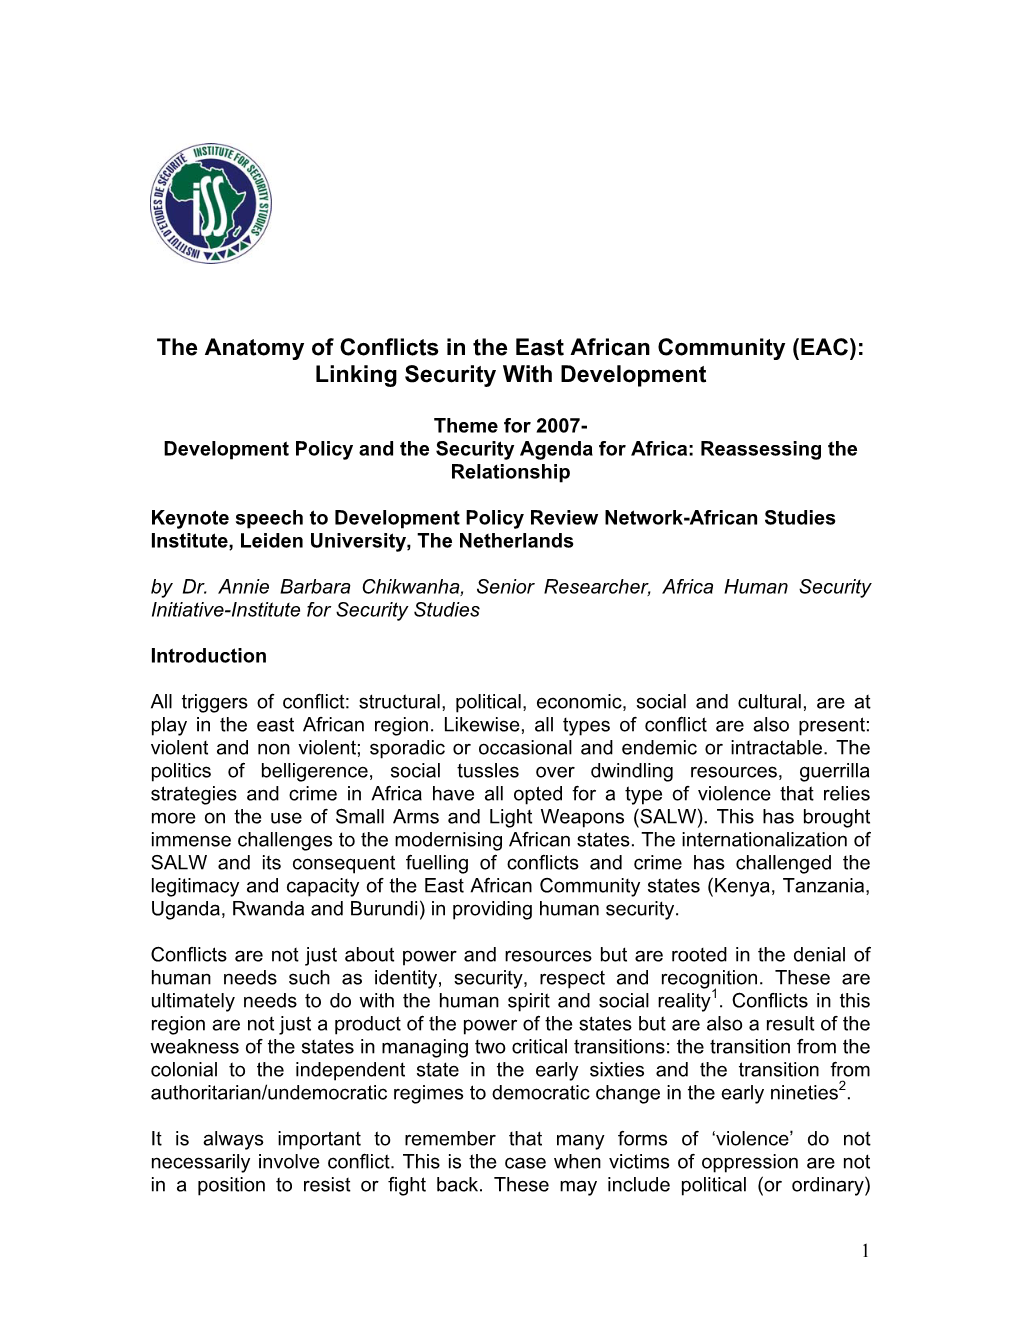 The Anatomy of Conflicts in the East African Community (EAC): Linking Security with Development